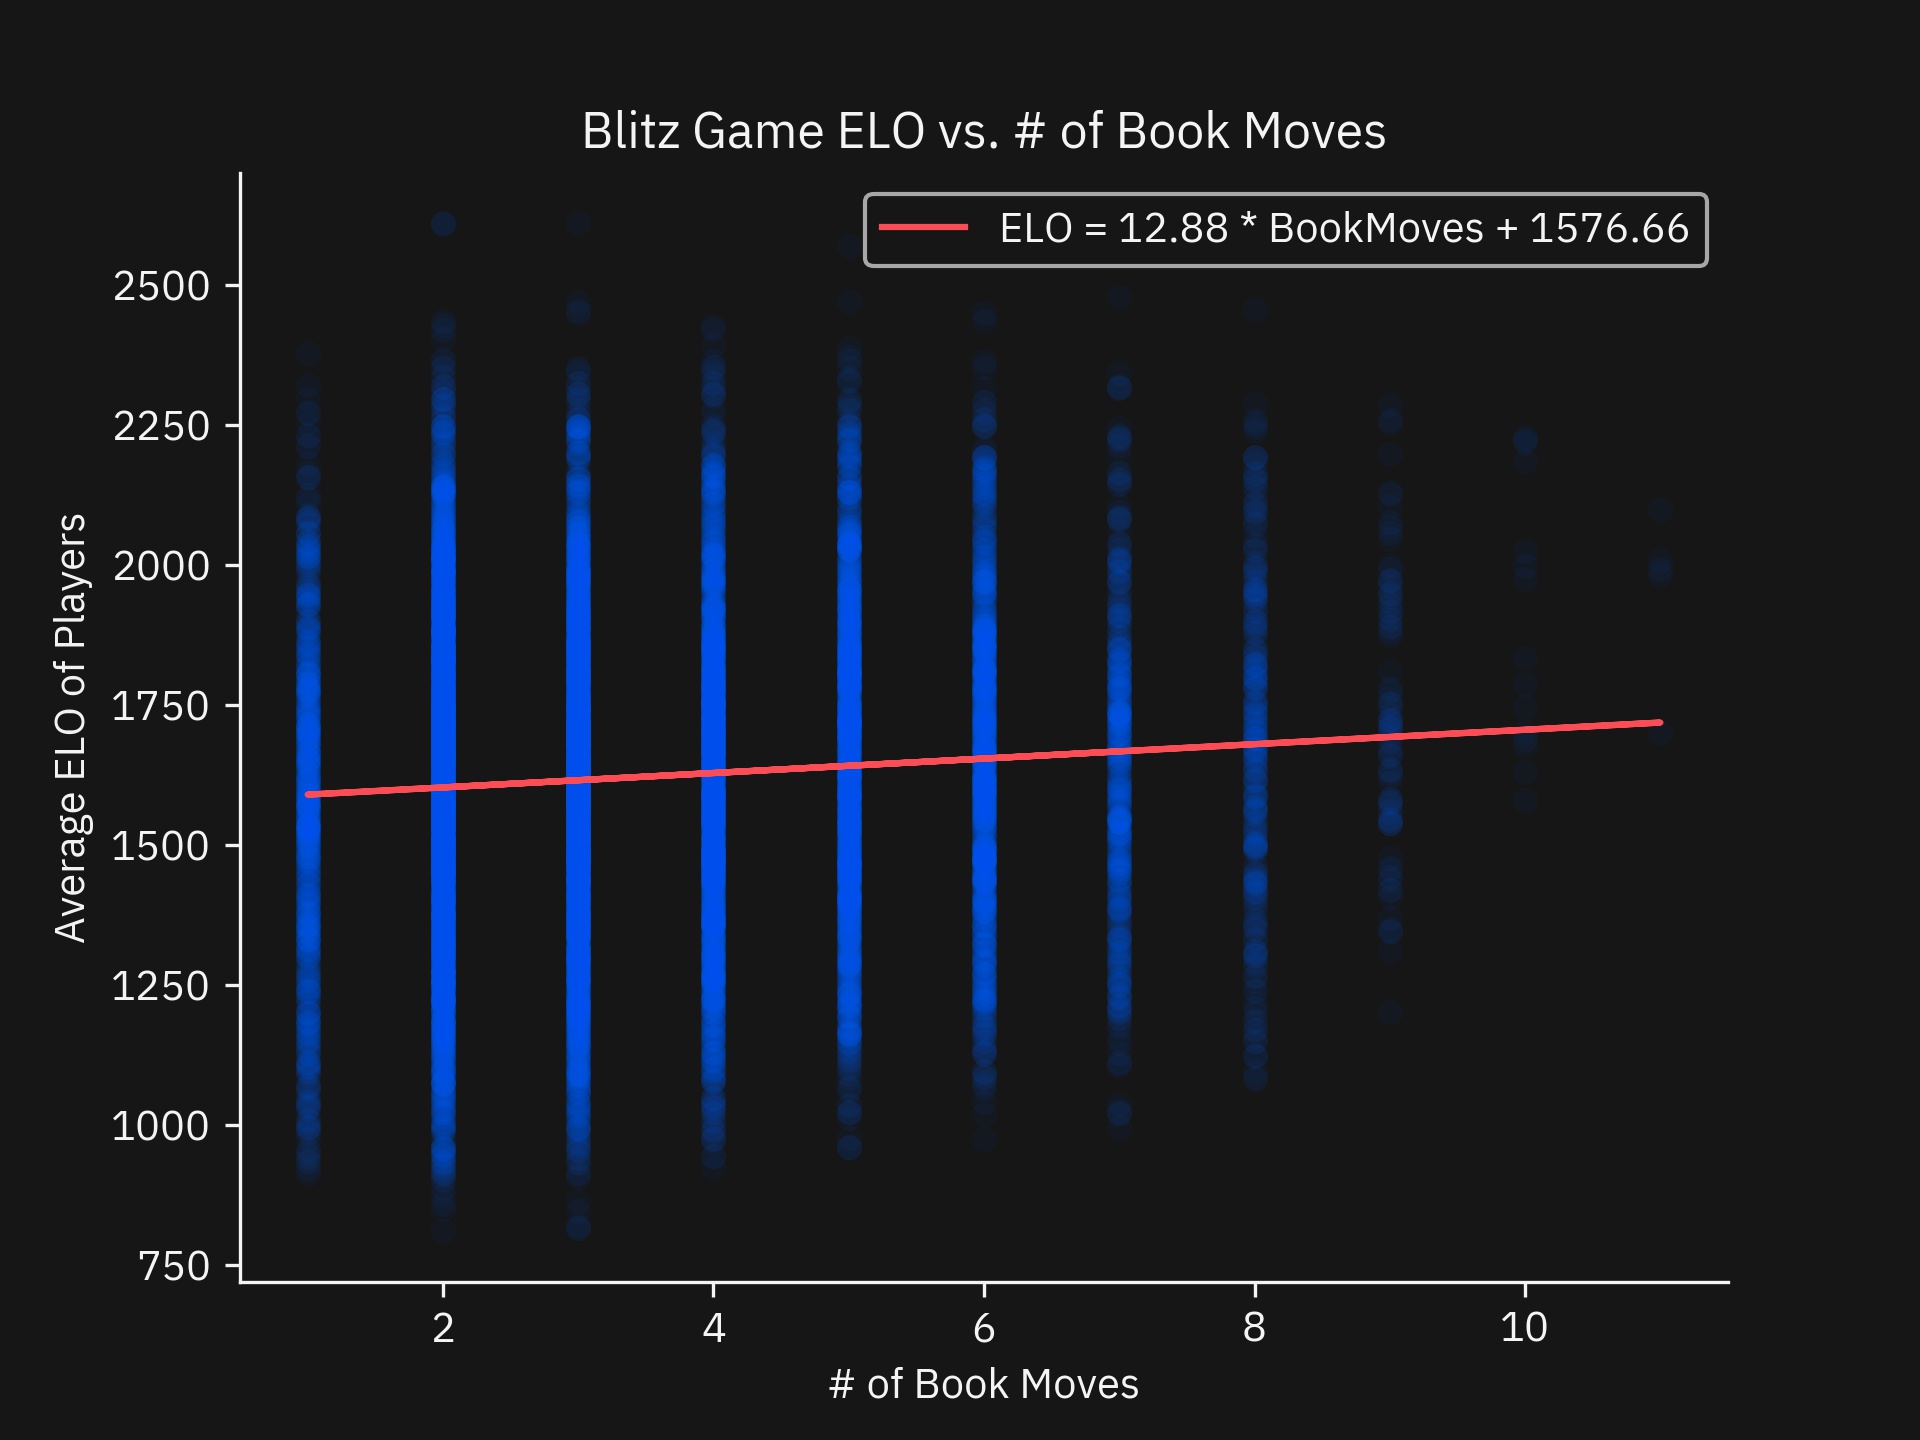 Scatter plot of Average Player ELO vs number of Book moves featured for Blitz games